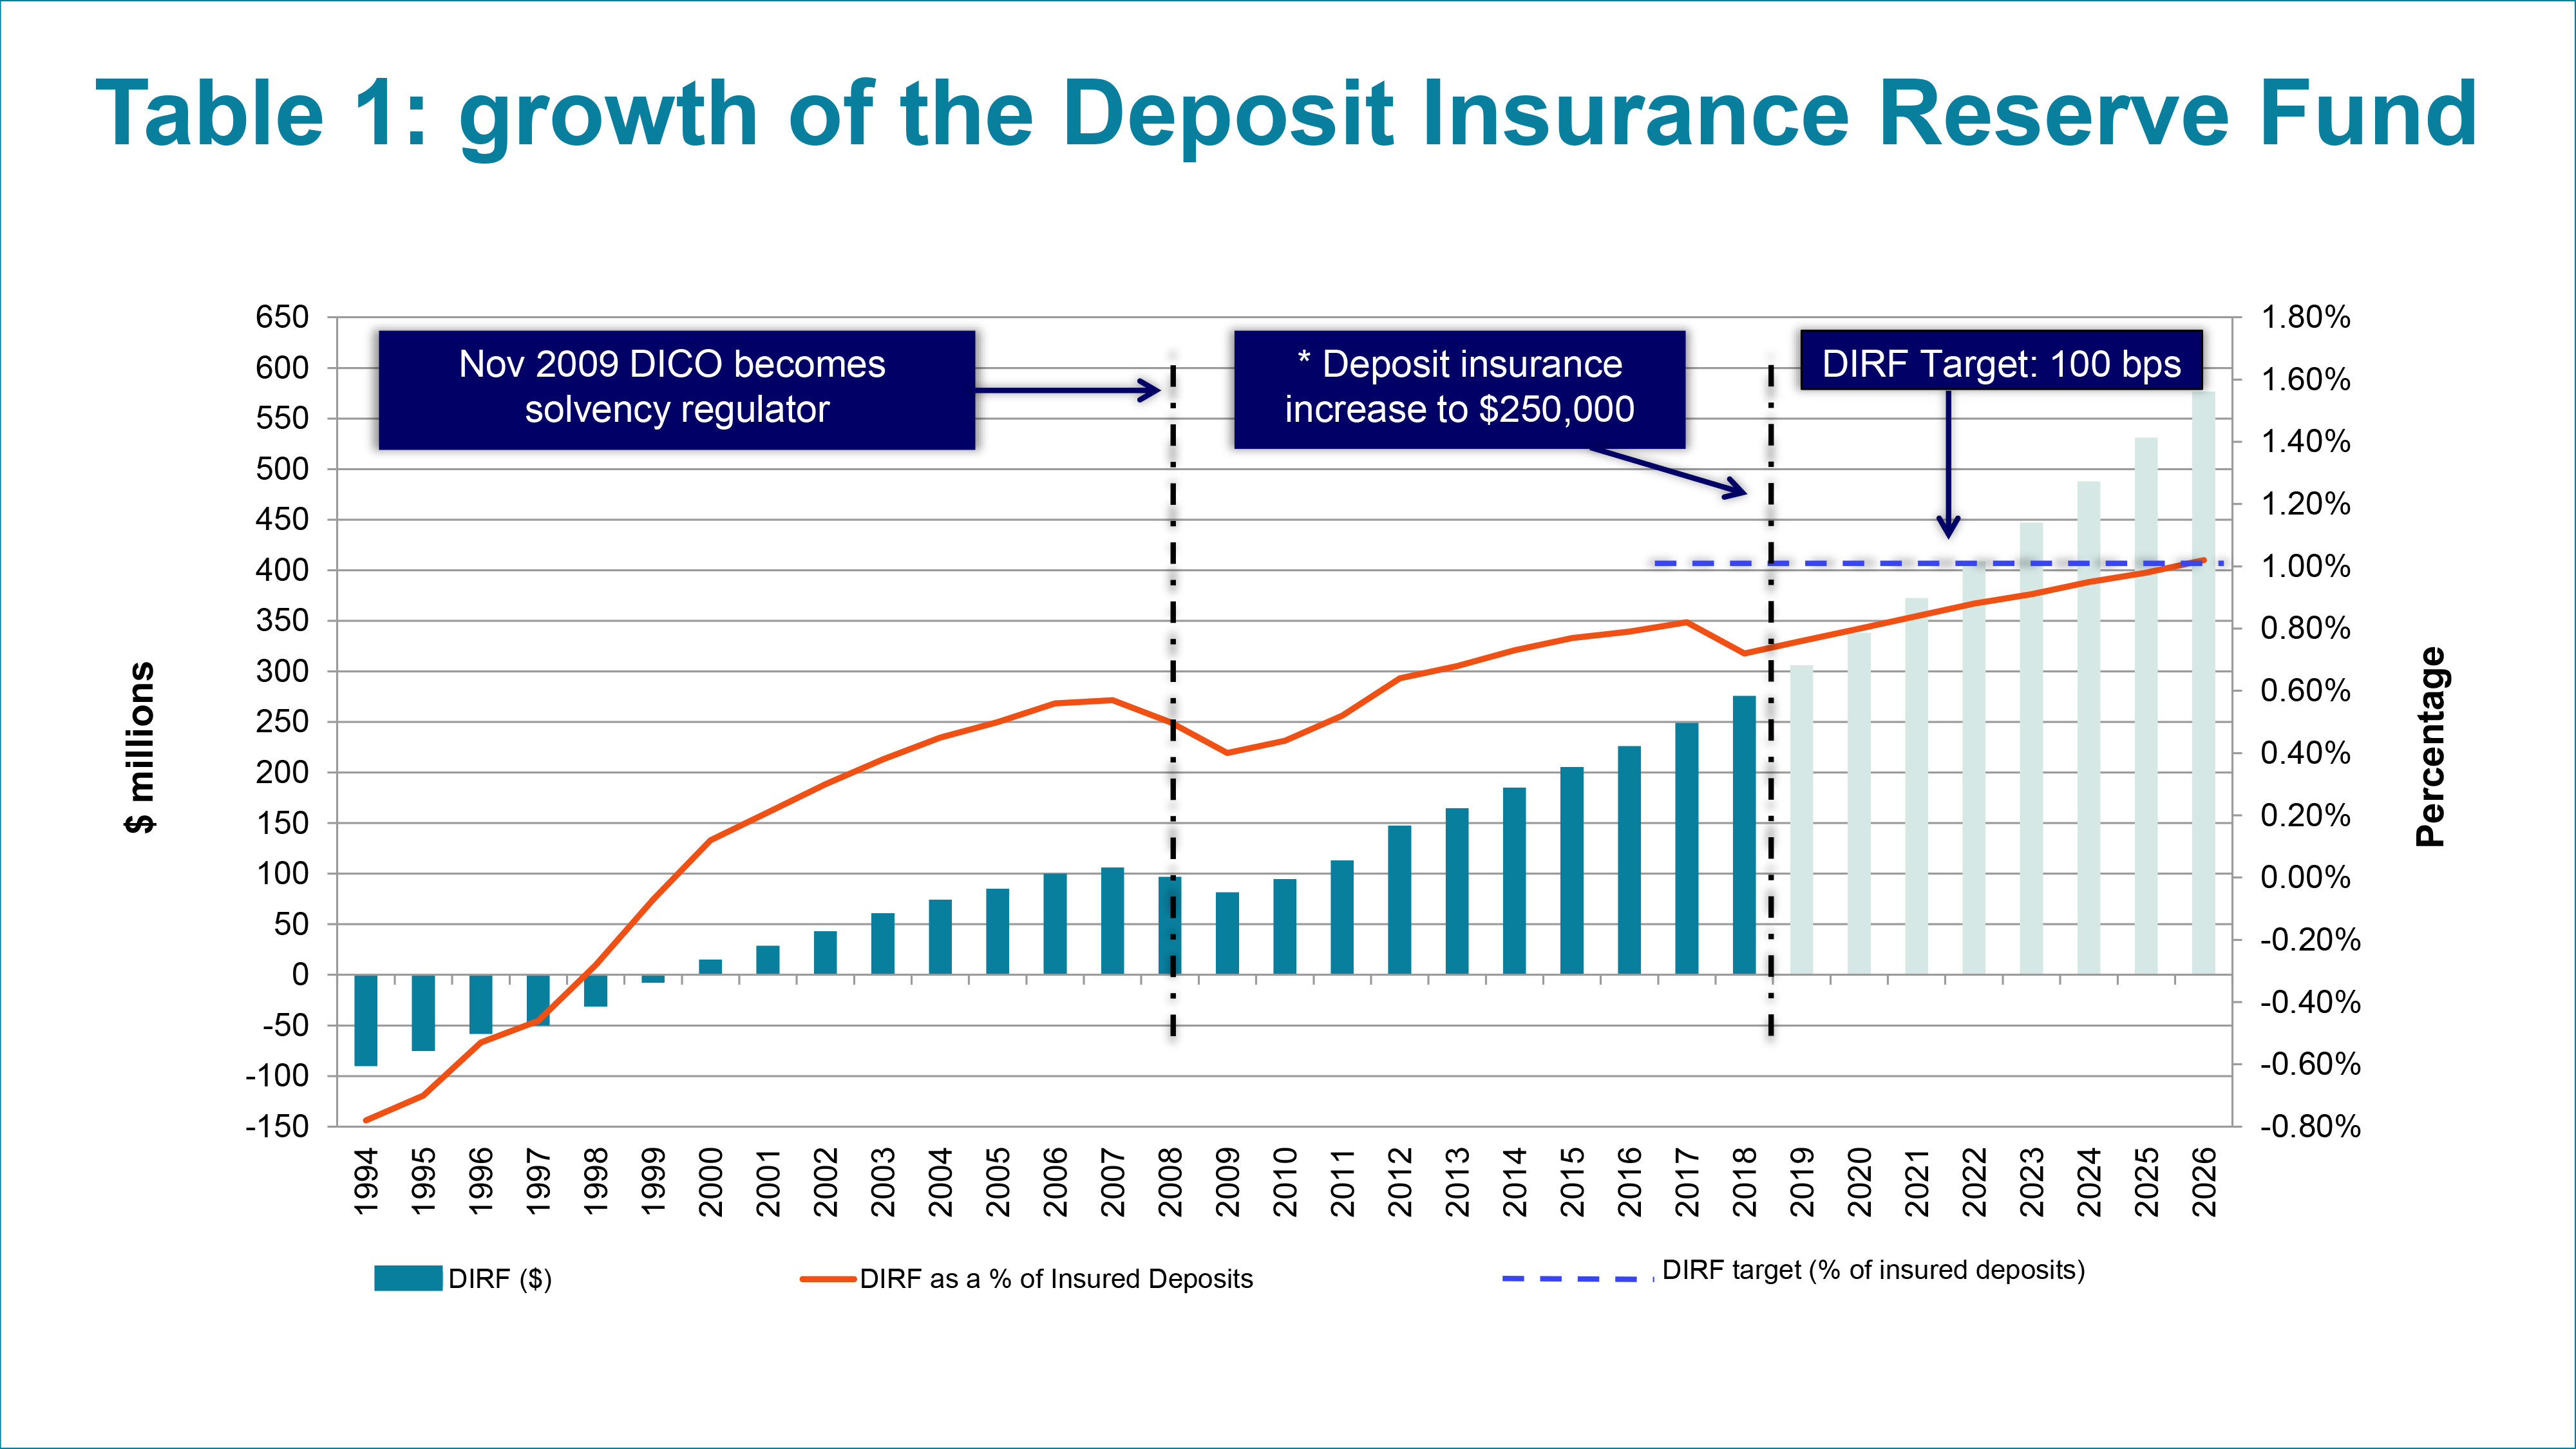 Table 1: Growth of the Deposit Insurance Reserve Fund